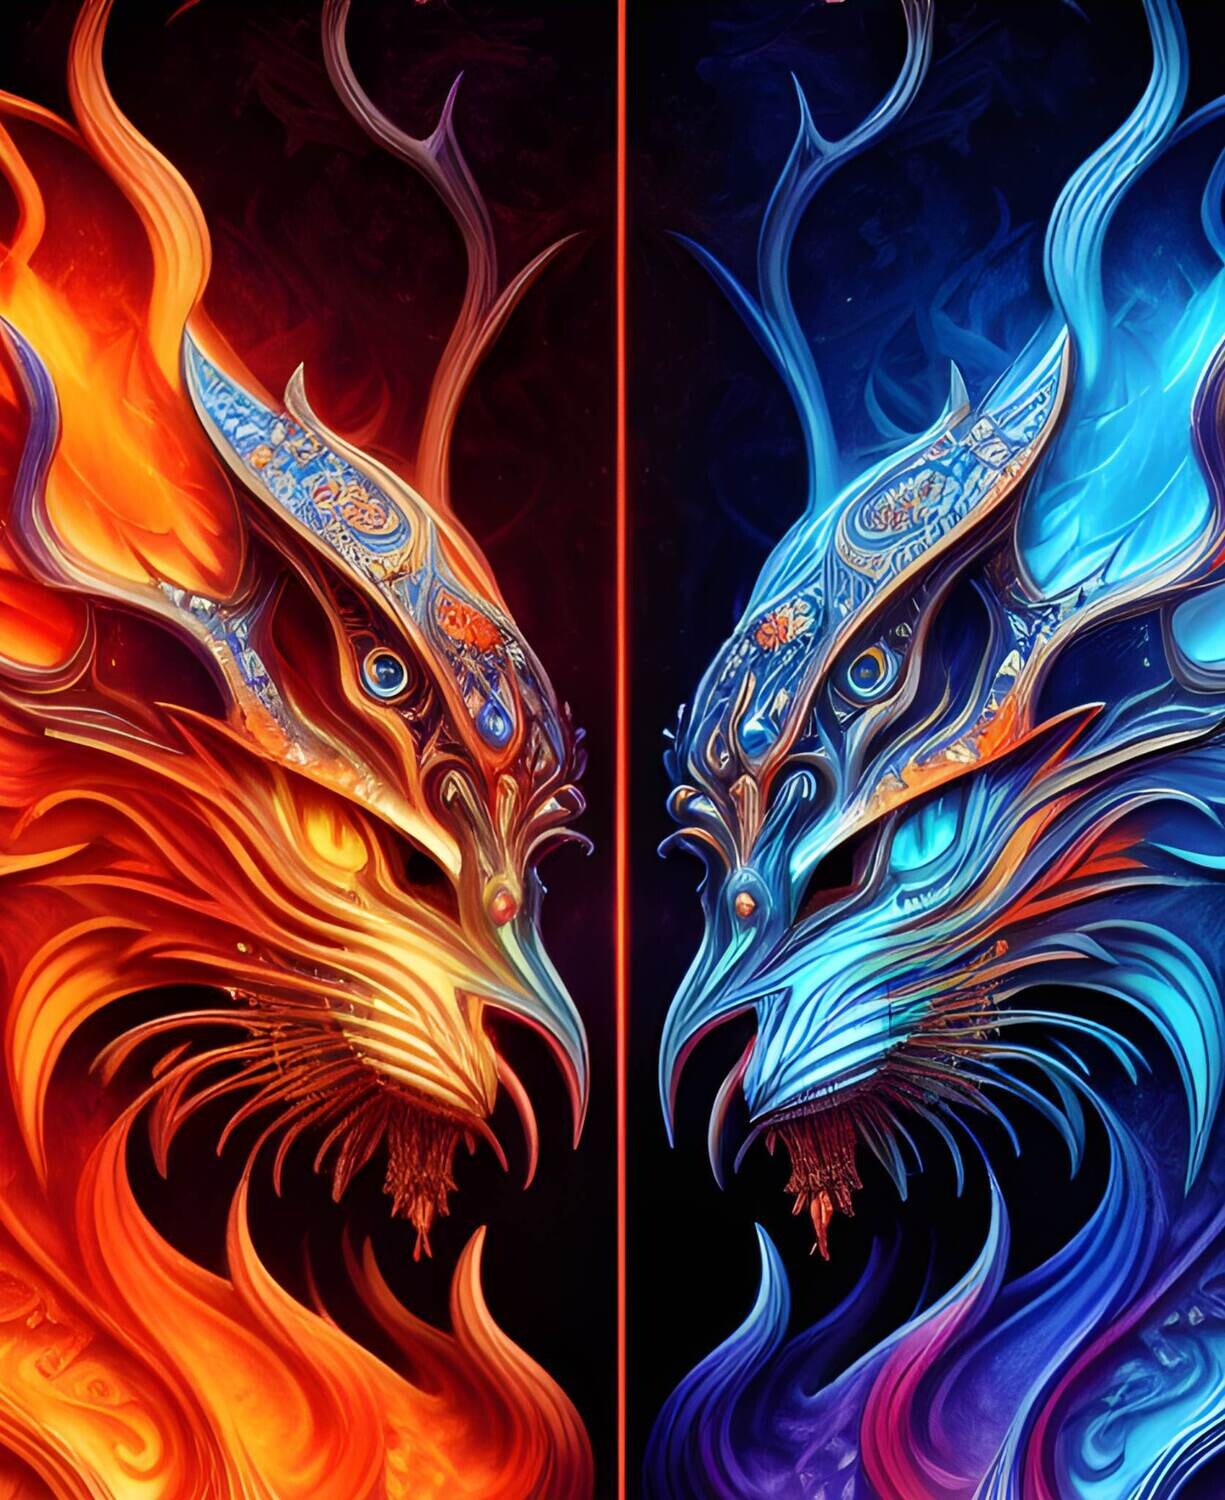 Fire and Ice Dragons 996 - Specially ordered for you. Delivery is approximately 4 - 6 weeks.